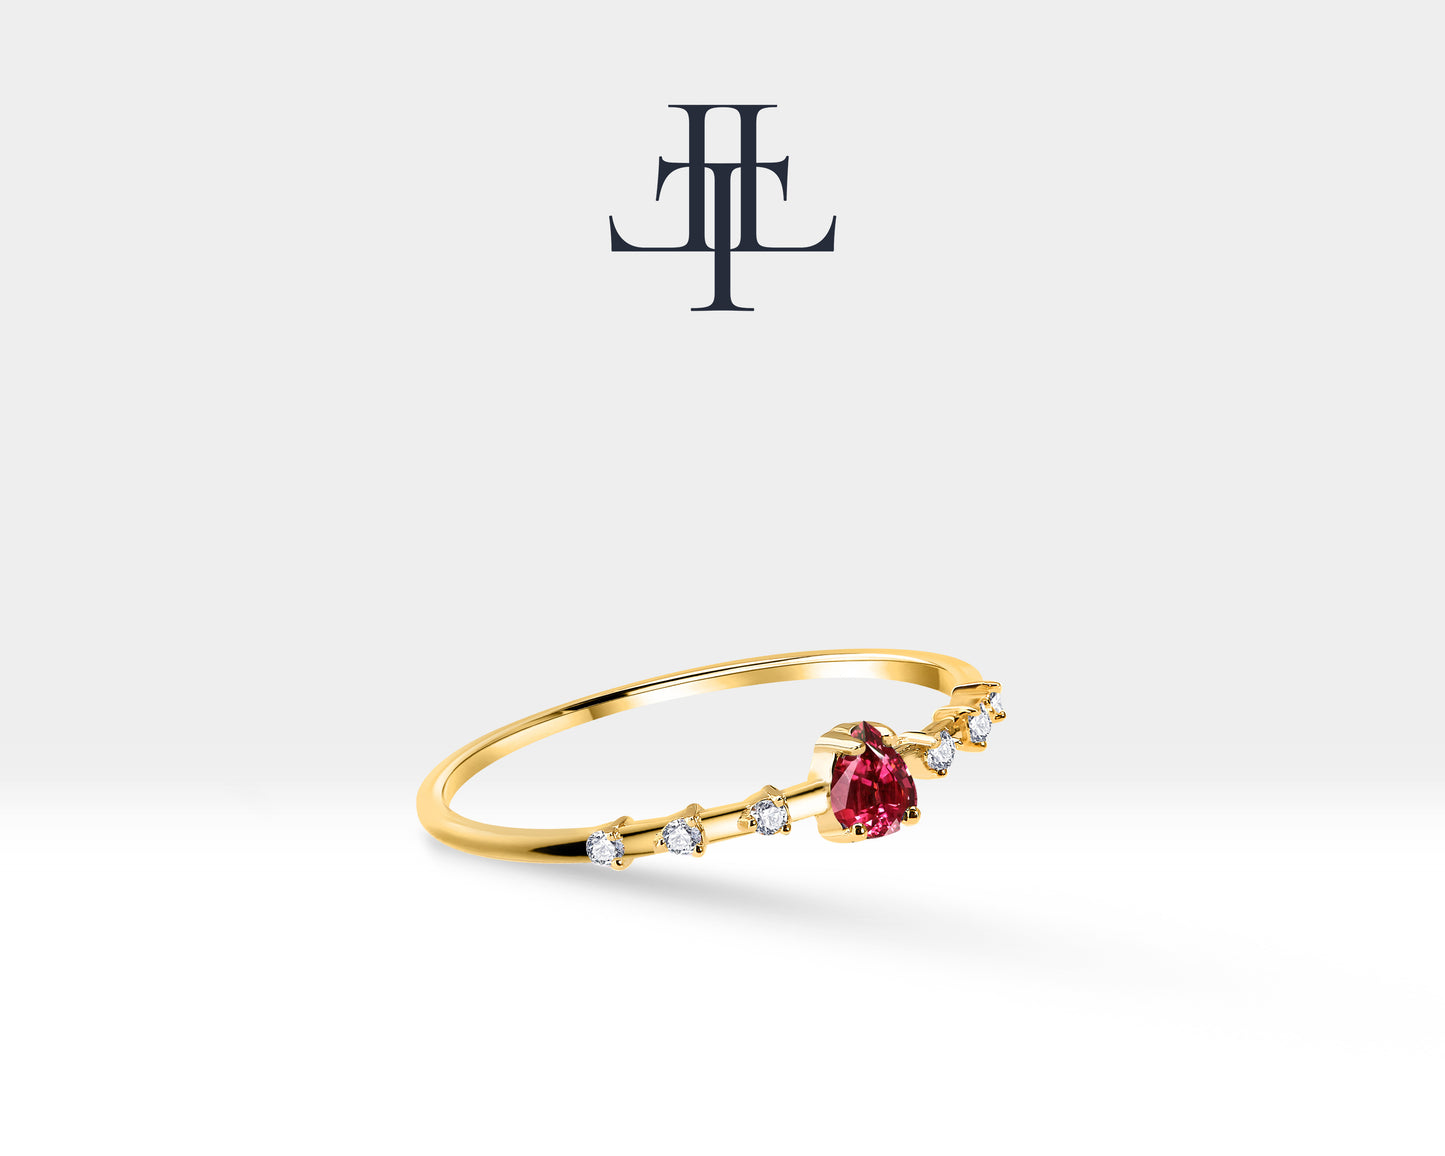 14K Solitaire Gold Ring,Engagement Ring,Pear Cut Ruby Ring,Tiny Diamond Ring